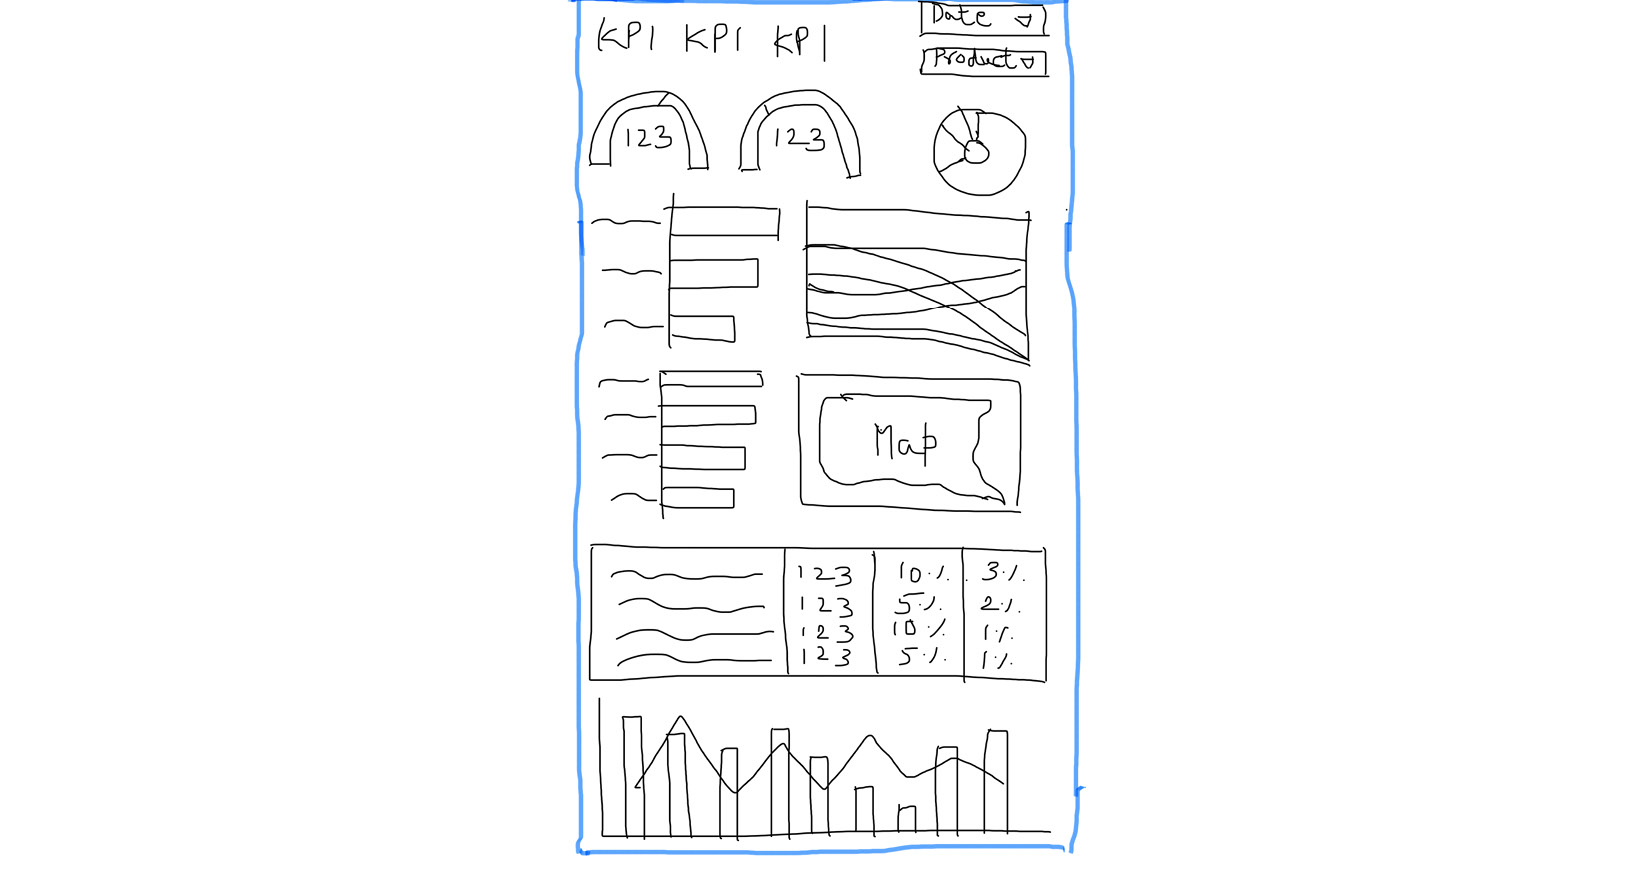 Figure 9.8 – Handdrawn sketch demonstrating the wireframe of the Overview page
